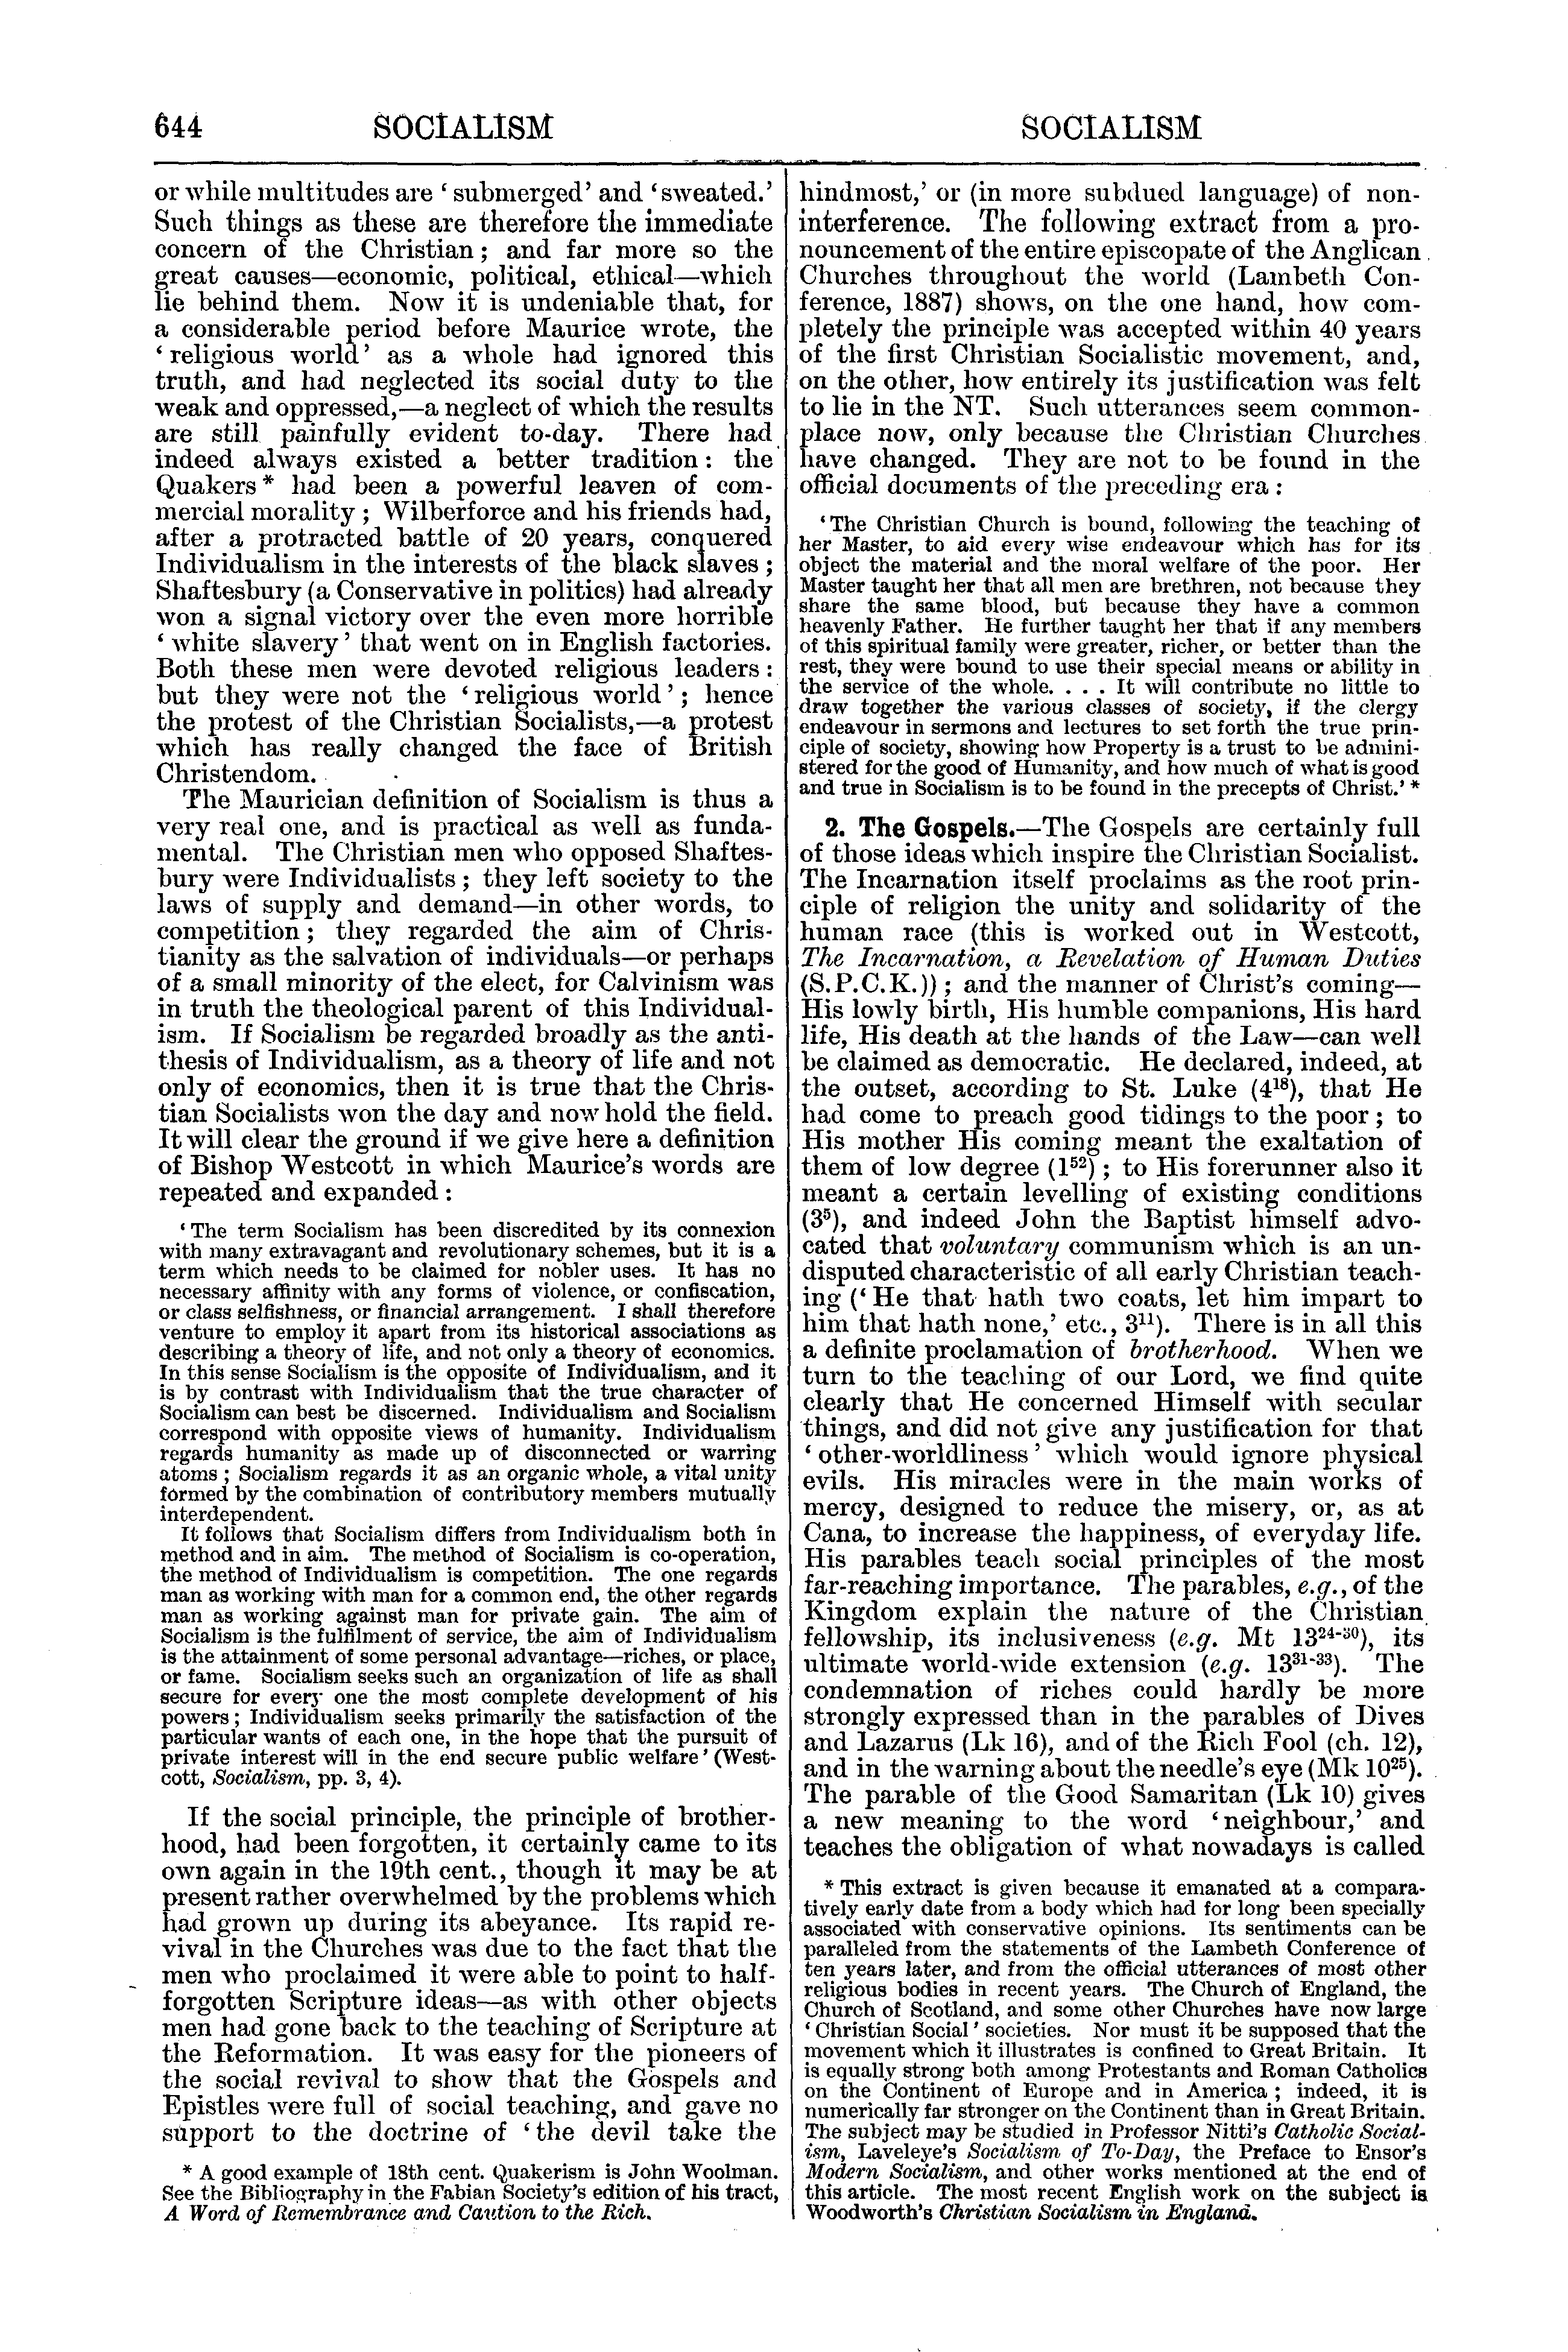 Image of page 644